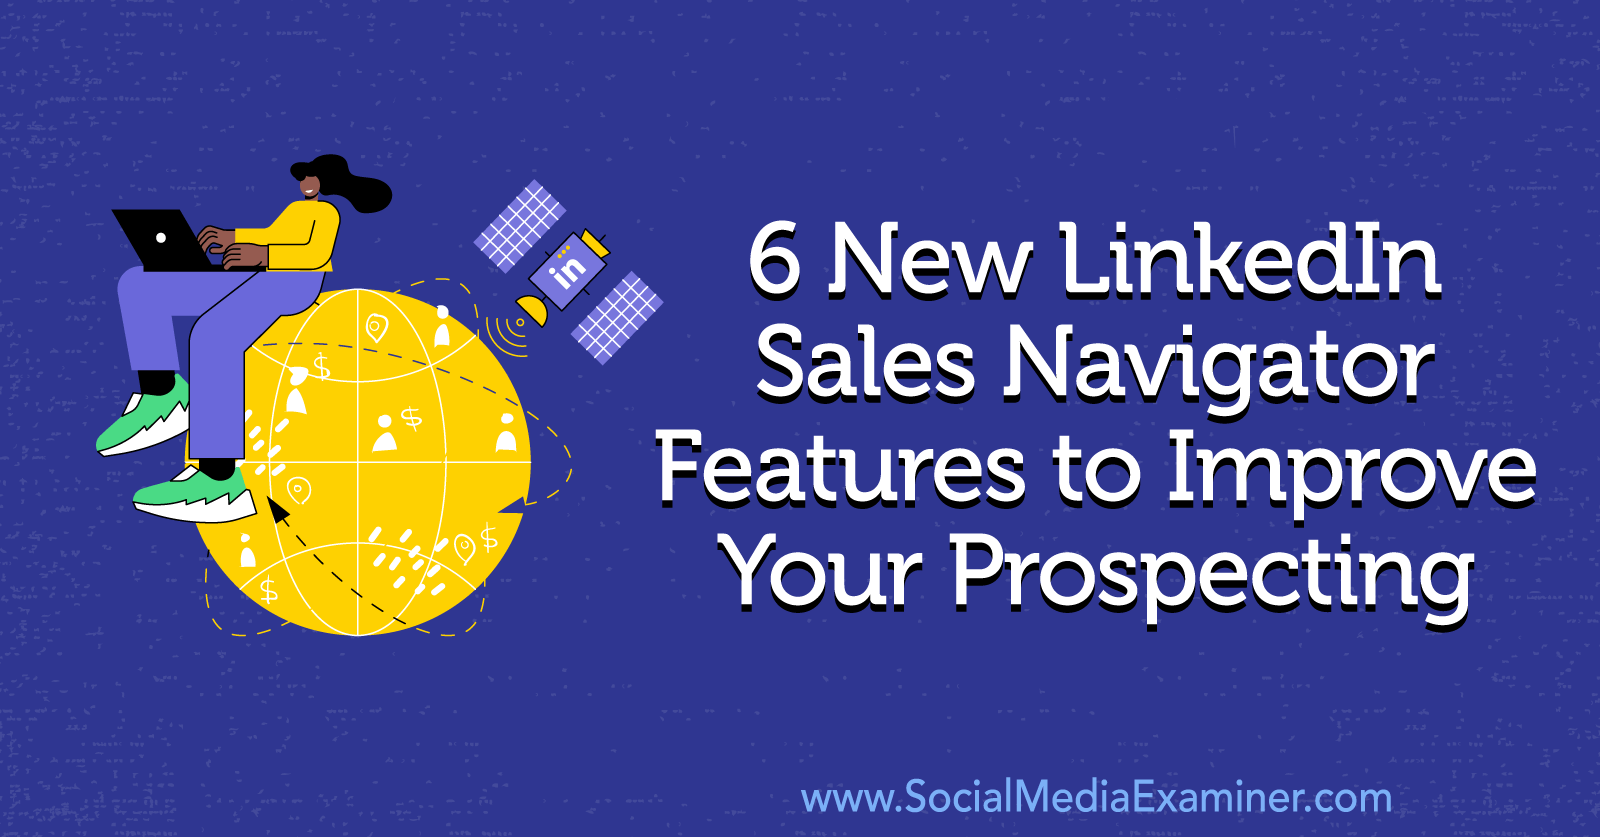 6 New LinkedIn Sales Navigator Features to Improve Your Prospecting by Anna Sonnenberg on Social Media Examiner.